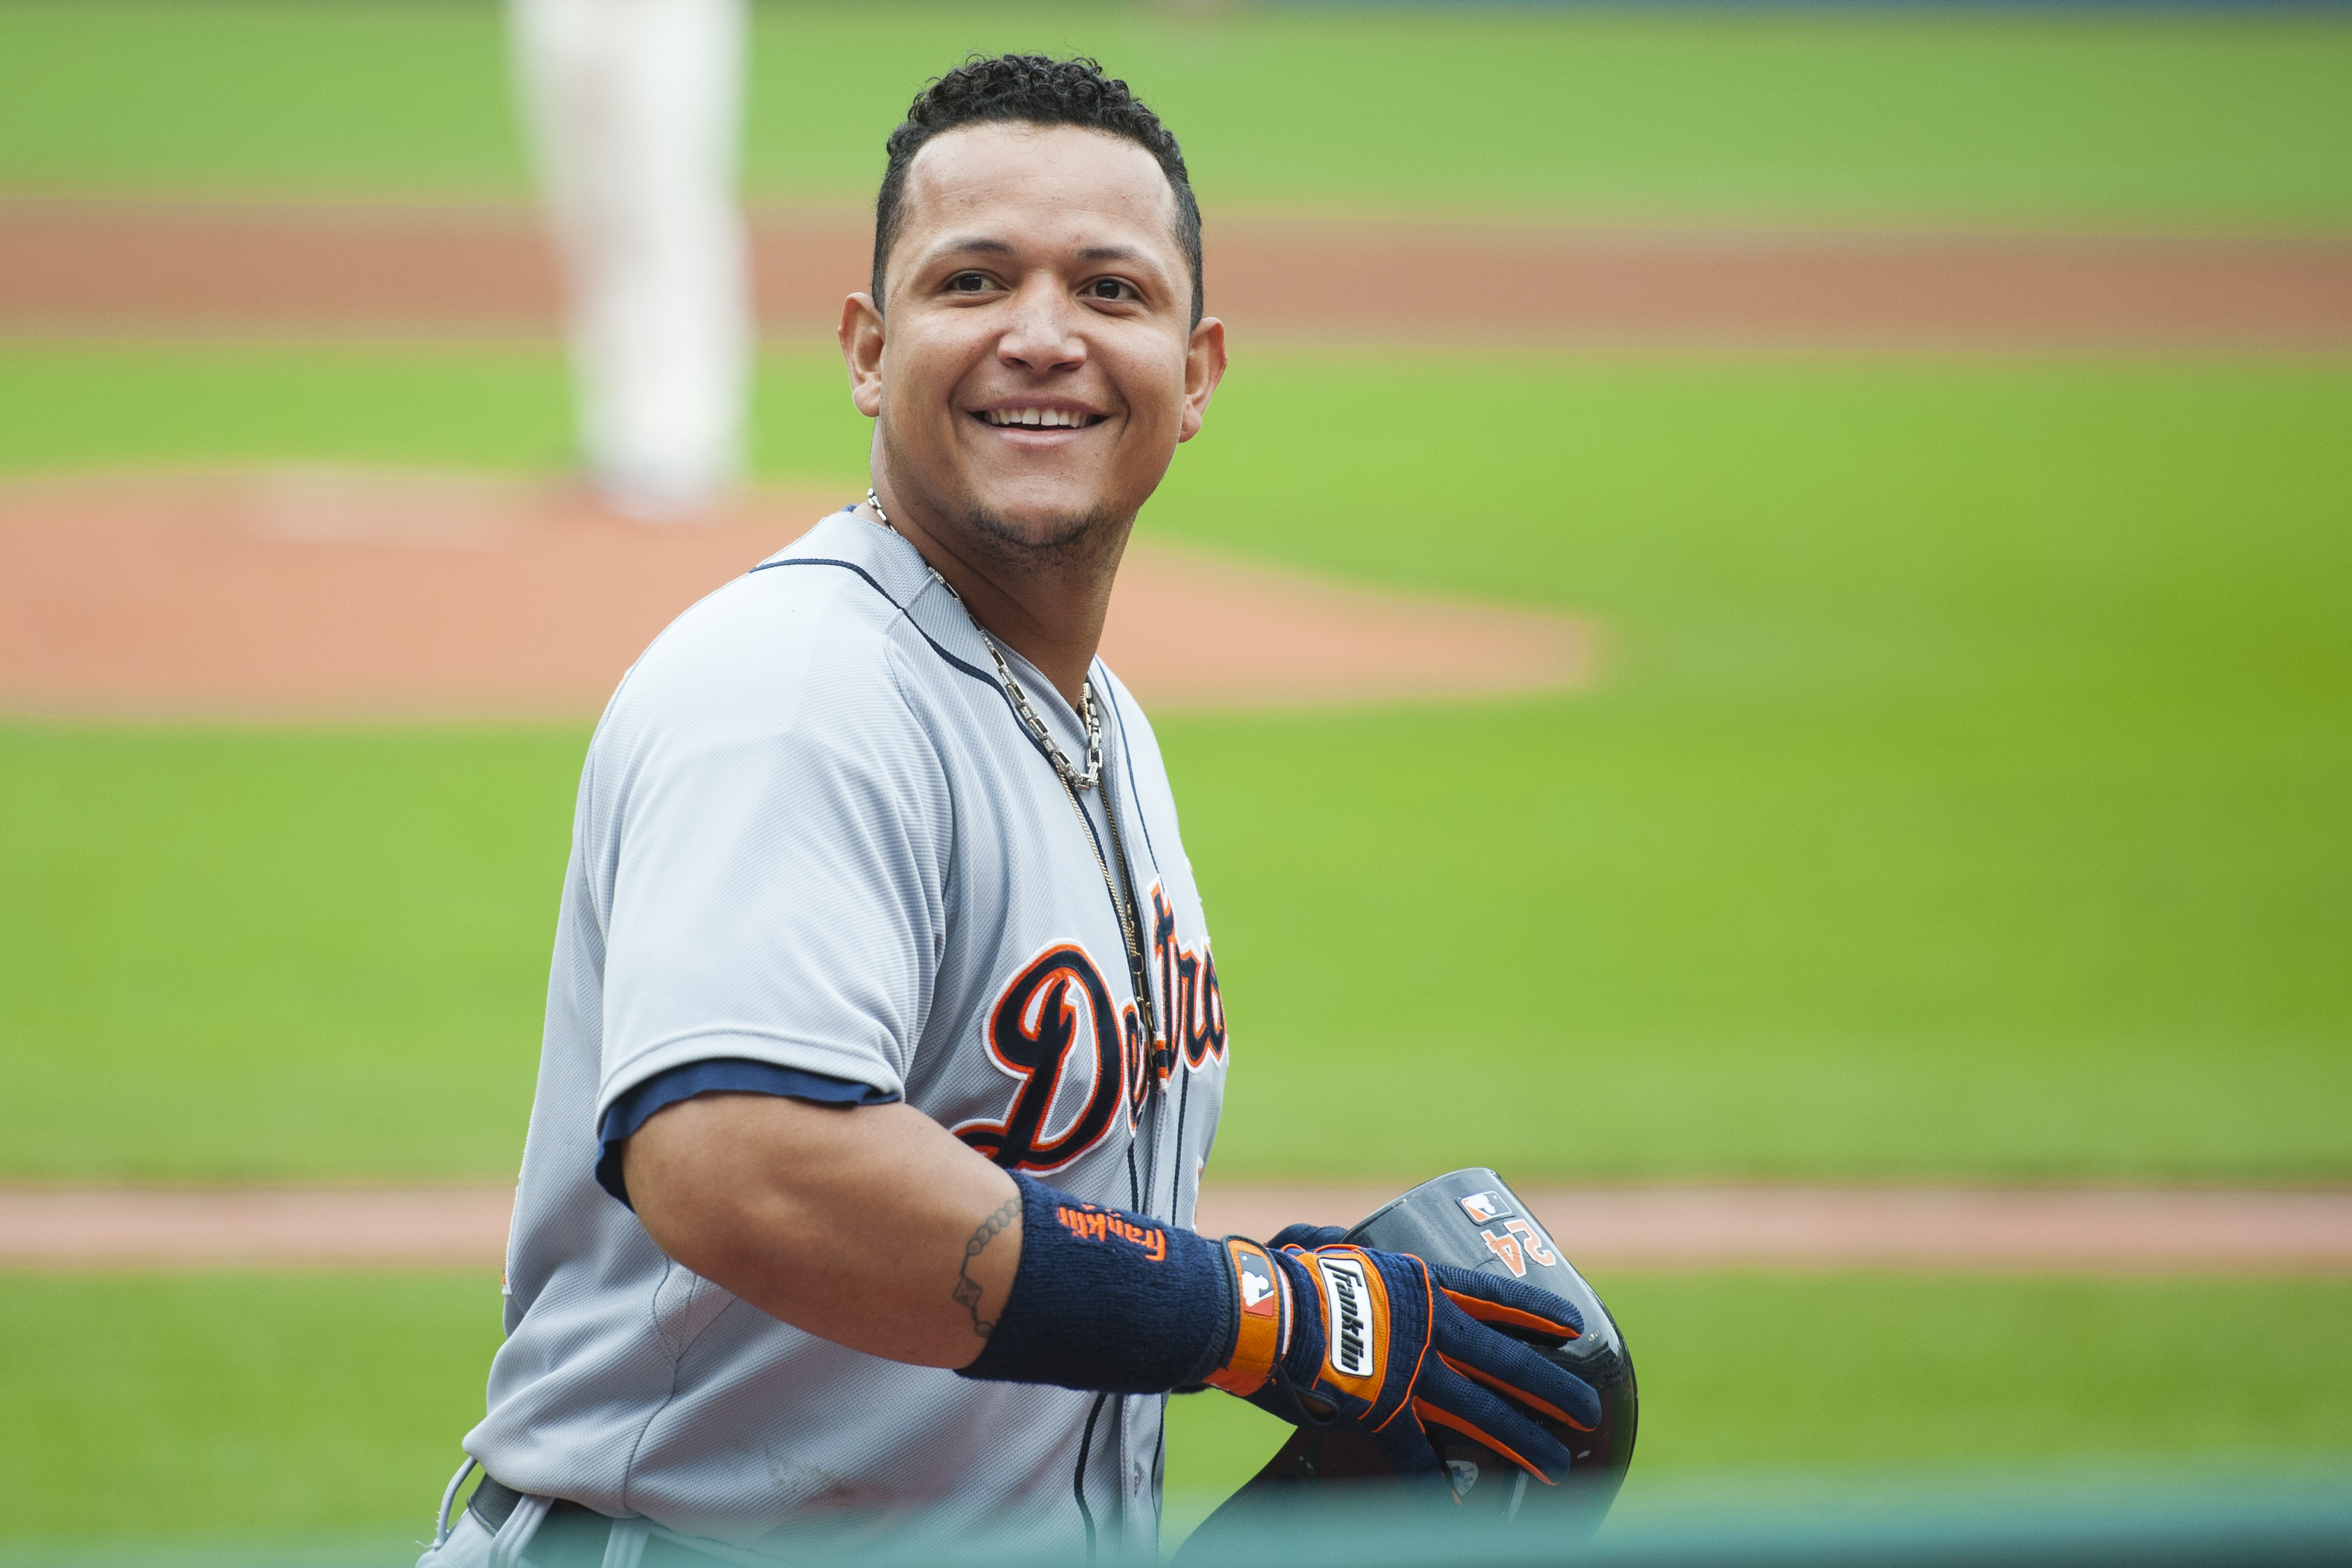 Miguel Cabrera: MVP and Triple Crown Winner - The Child's World